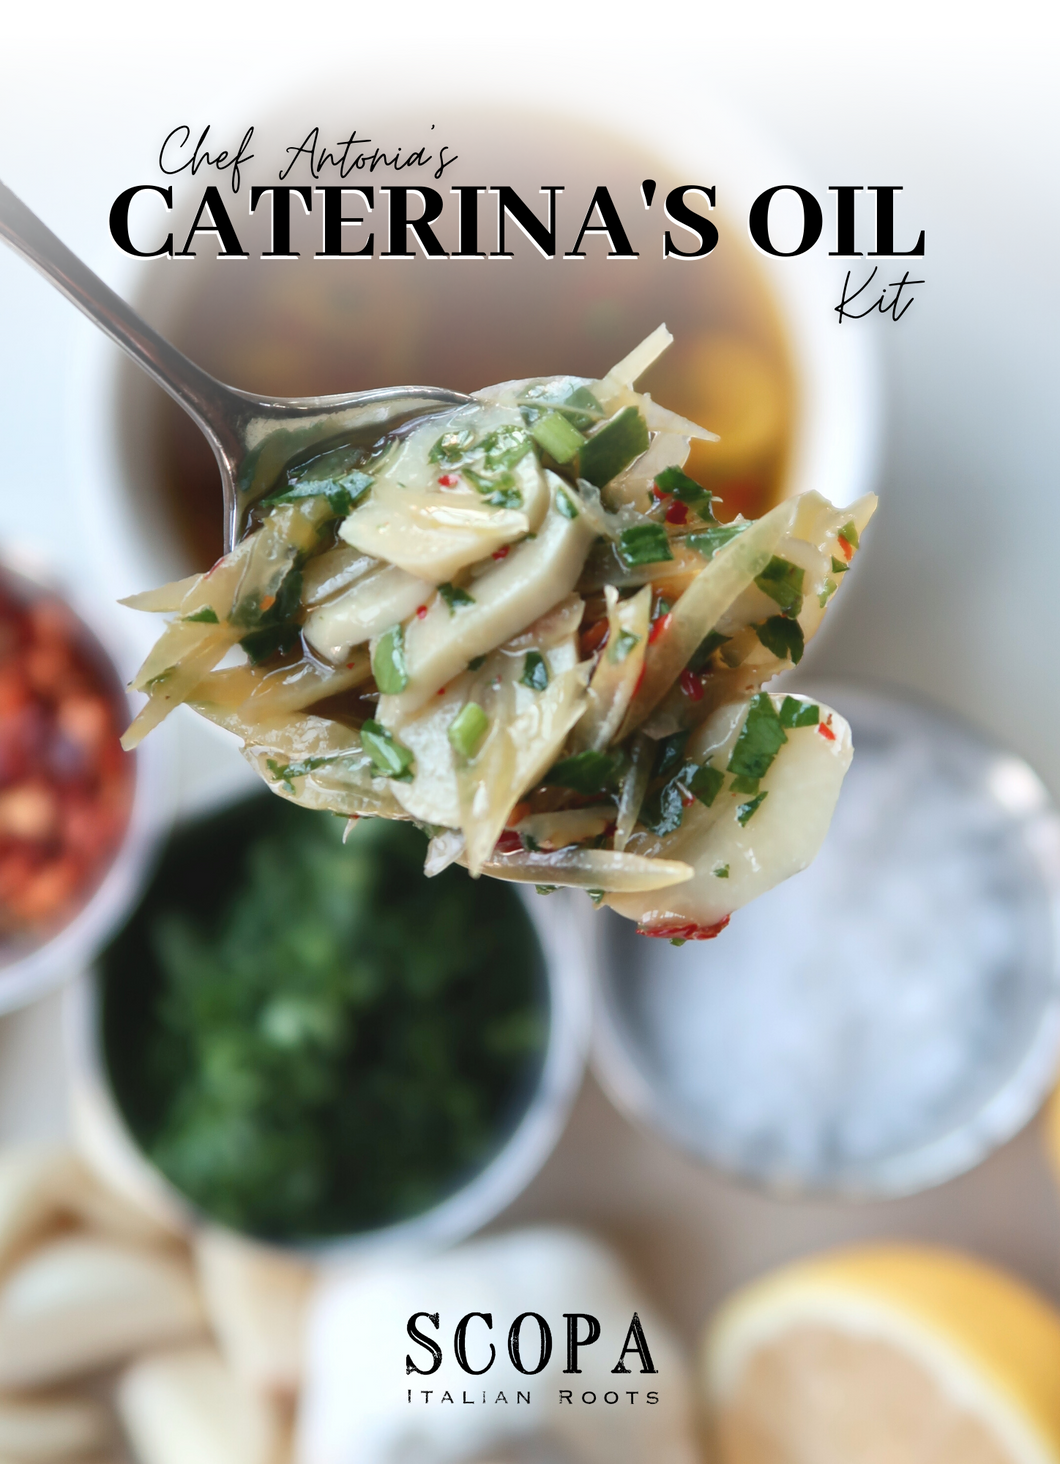 Make-Your-Own Caterina's Oil Kit